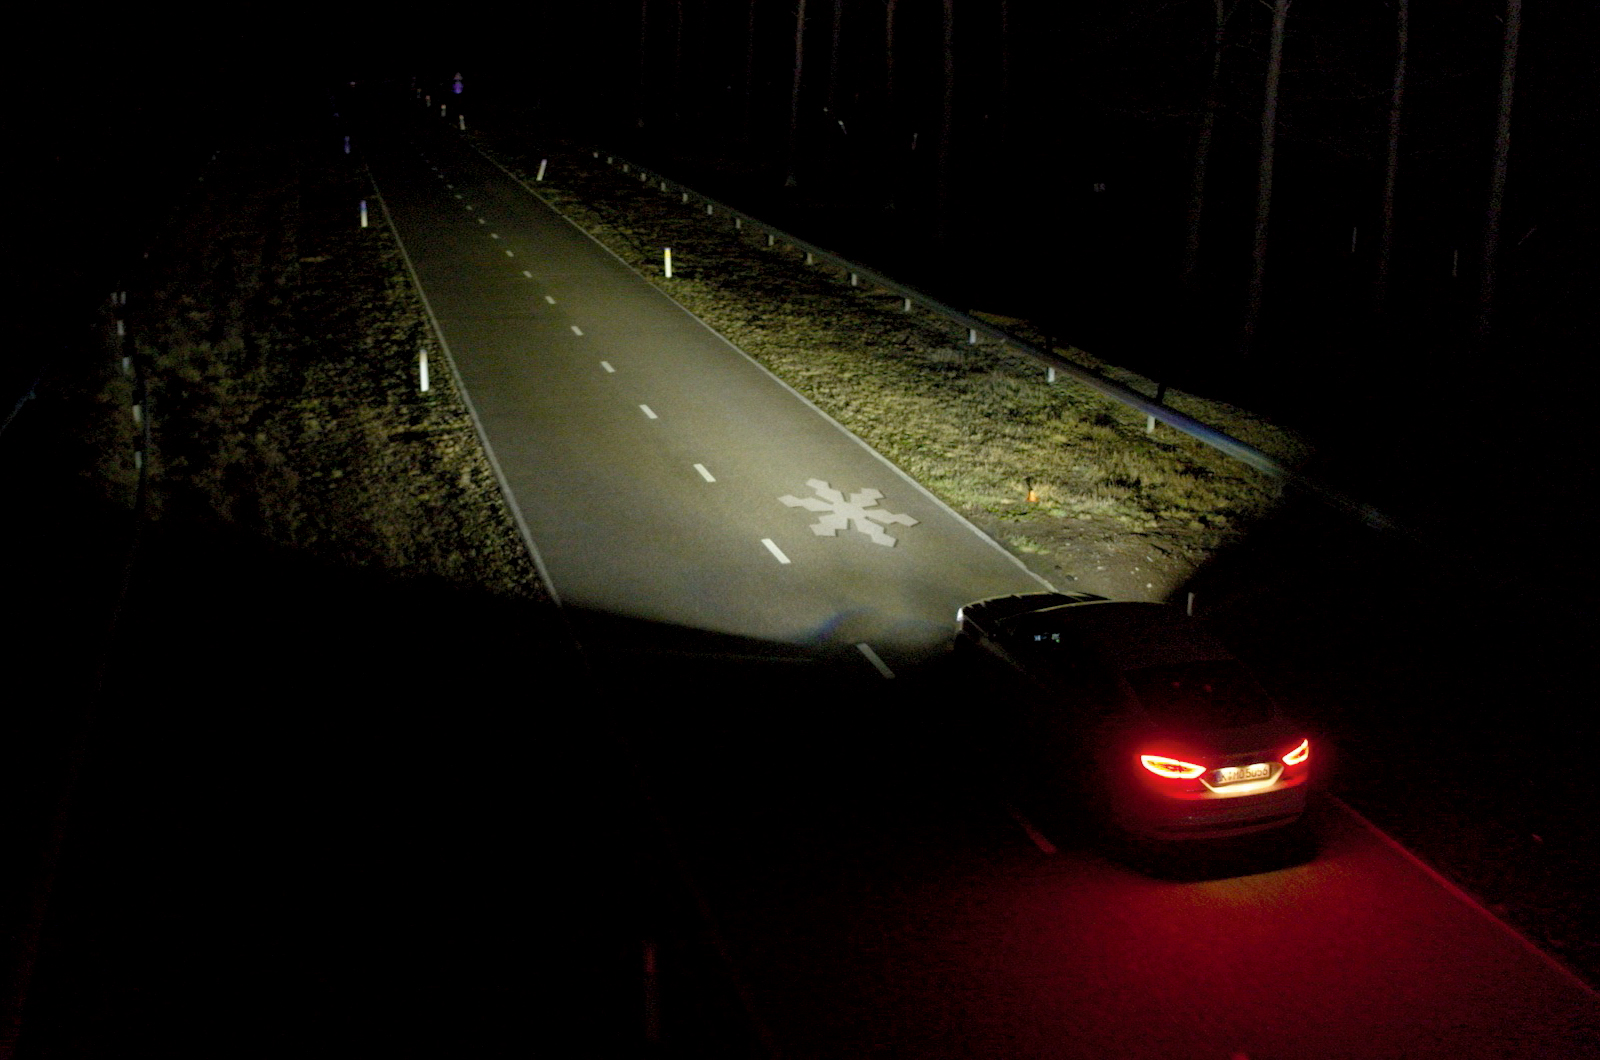 Should we let cars use the road as a projection screen?